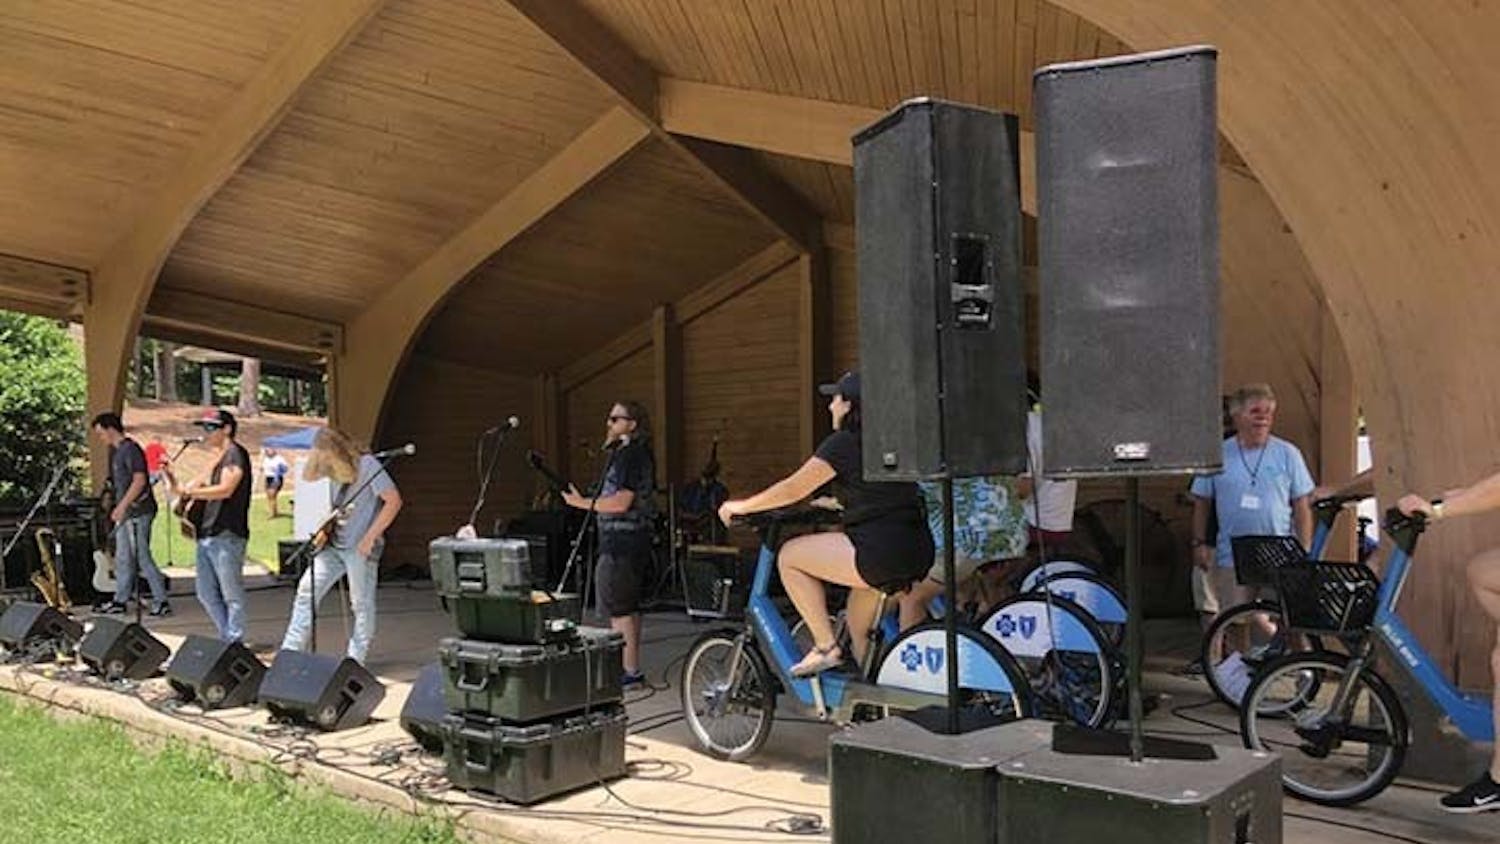 Volunteers ride stationary bikes powering live music at SolFest RollFest on July 2, 2022. This is the first bike-powered music festival in Columbia. 